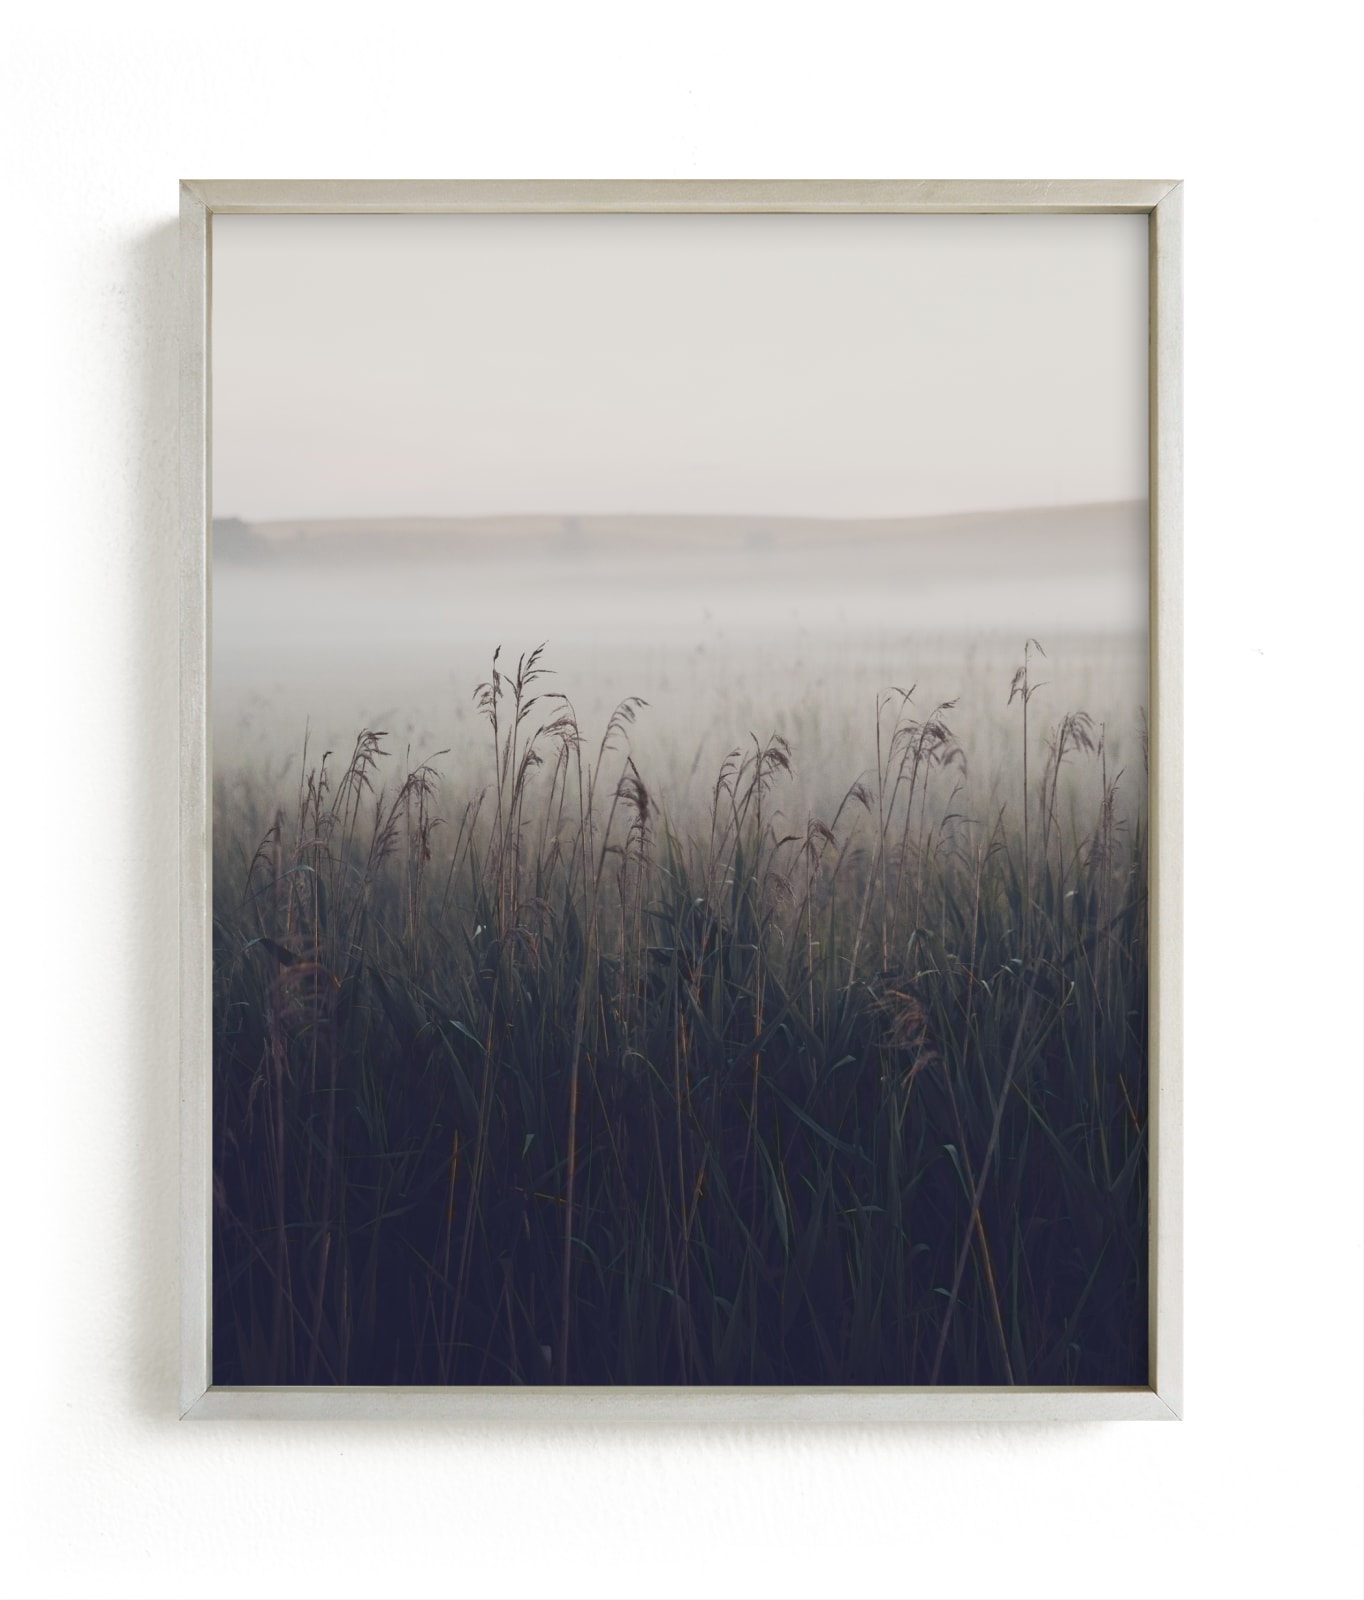 "Neutral silence" by Lying on the grass in beautiful frame options and a variety of sizes.